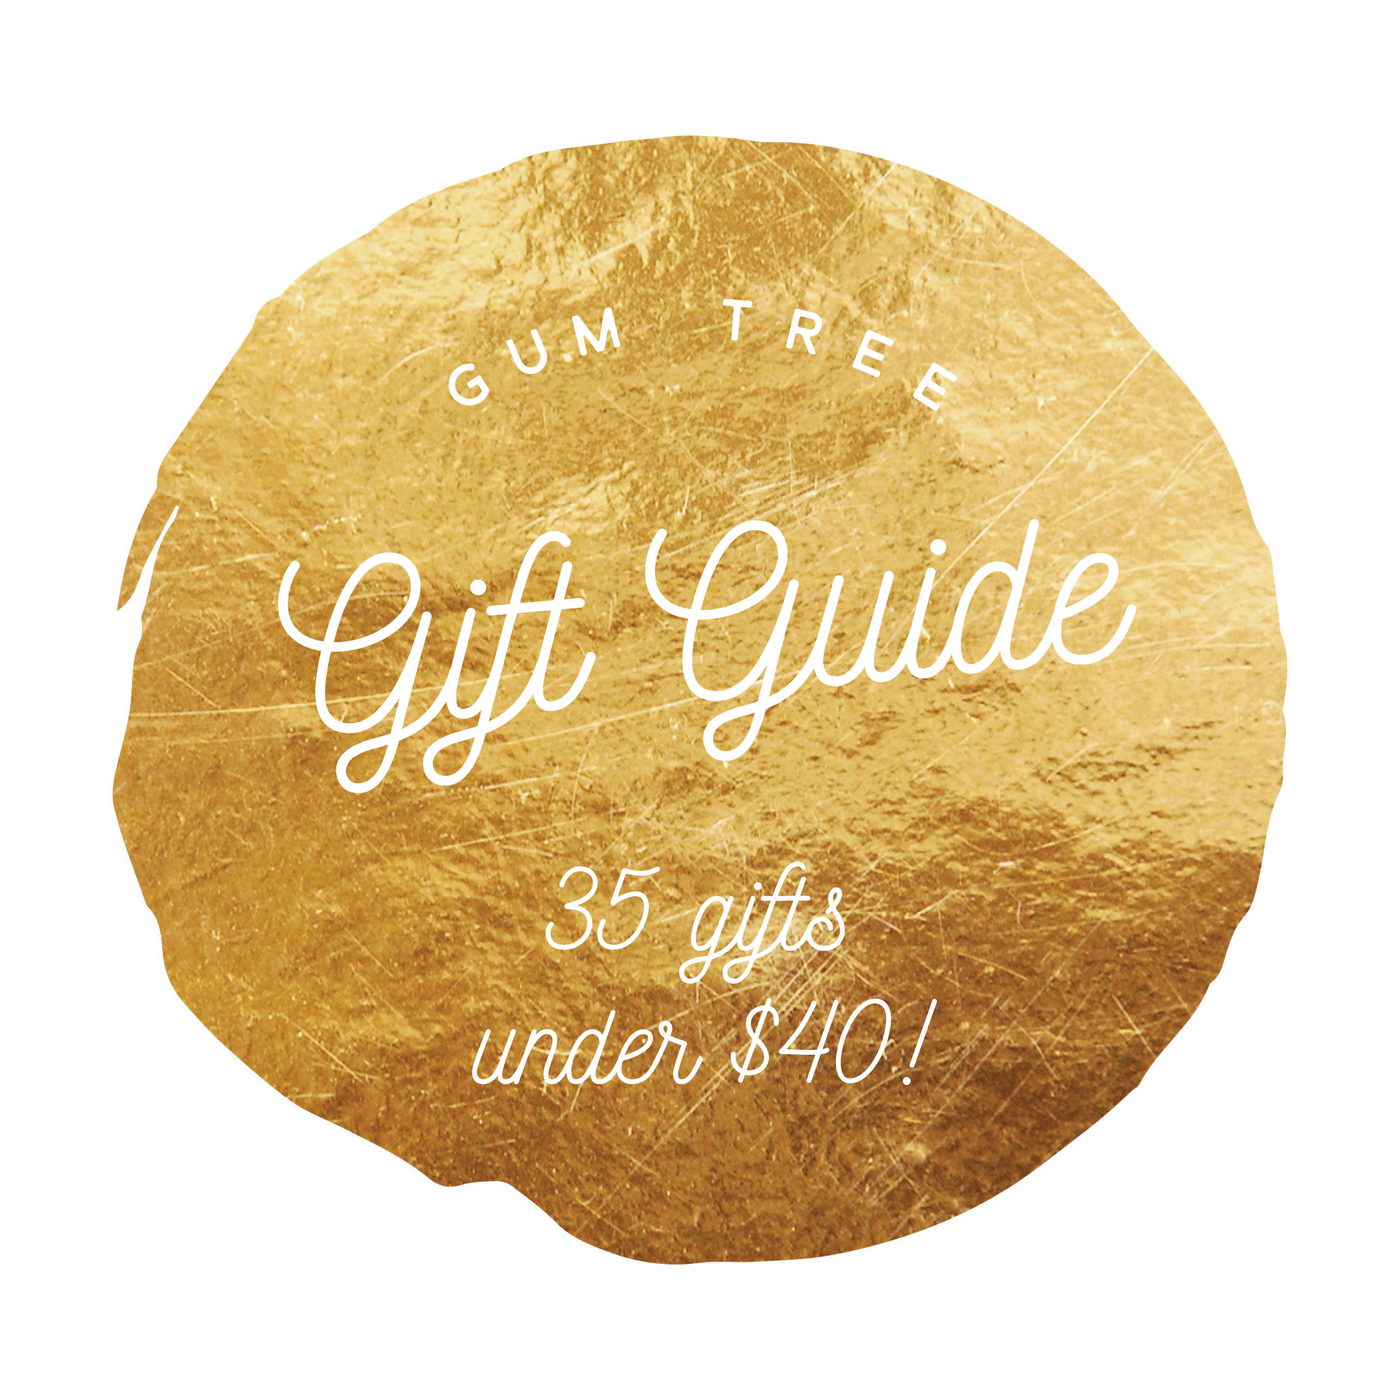 Gift Guide * 35 gifts under $40!